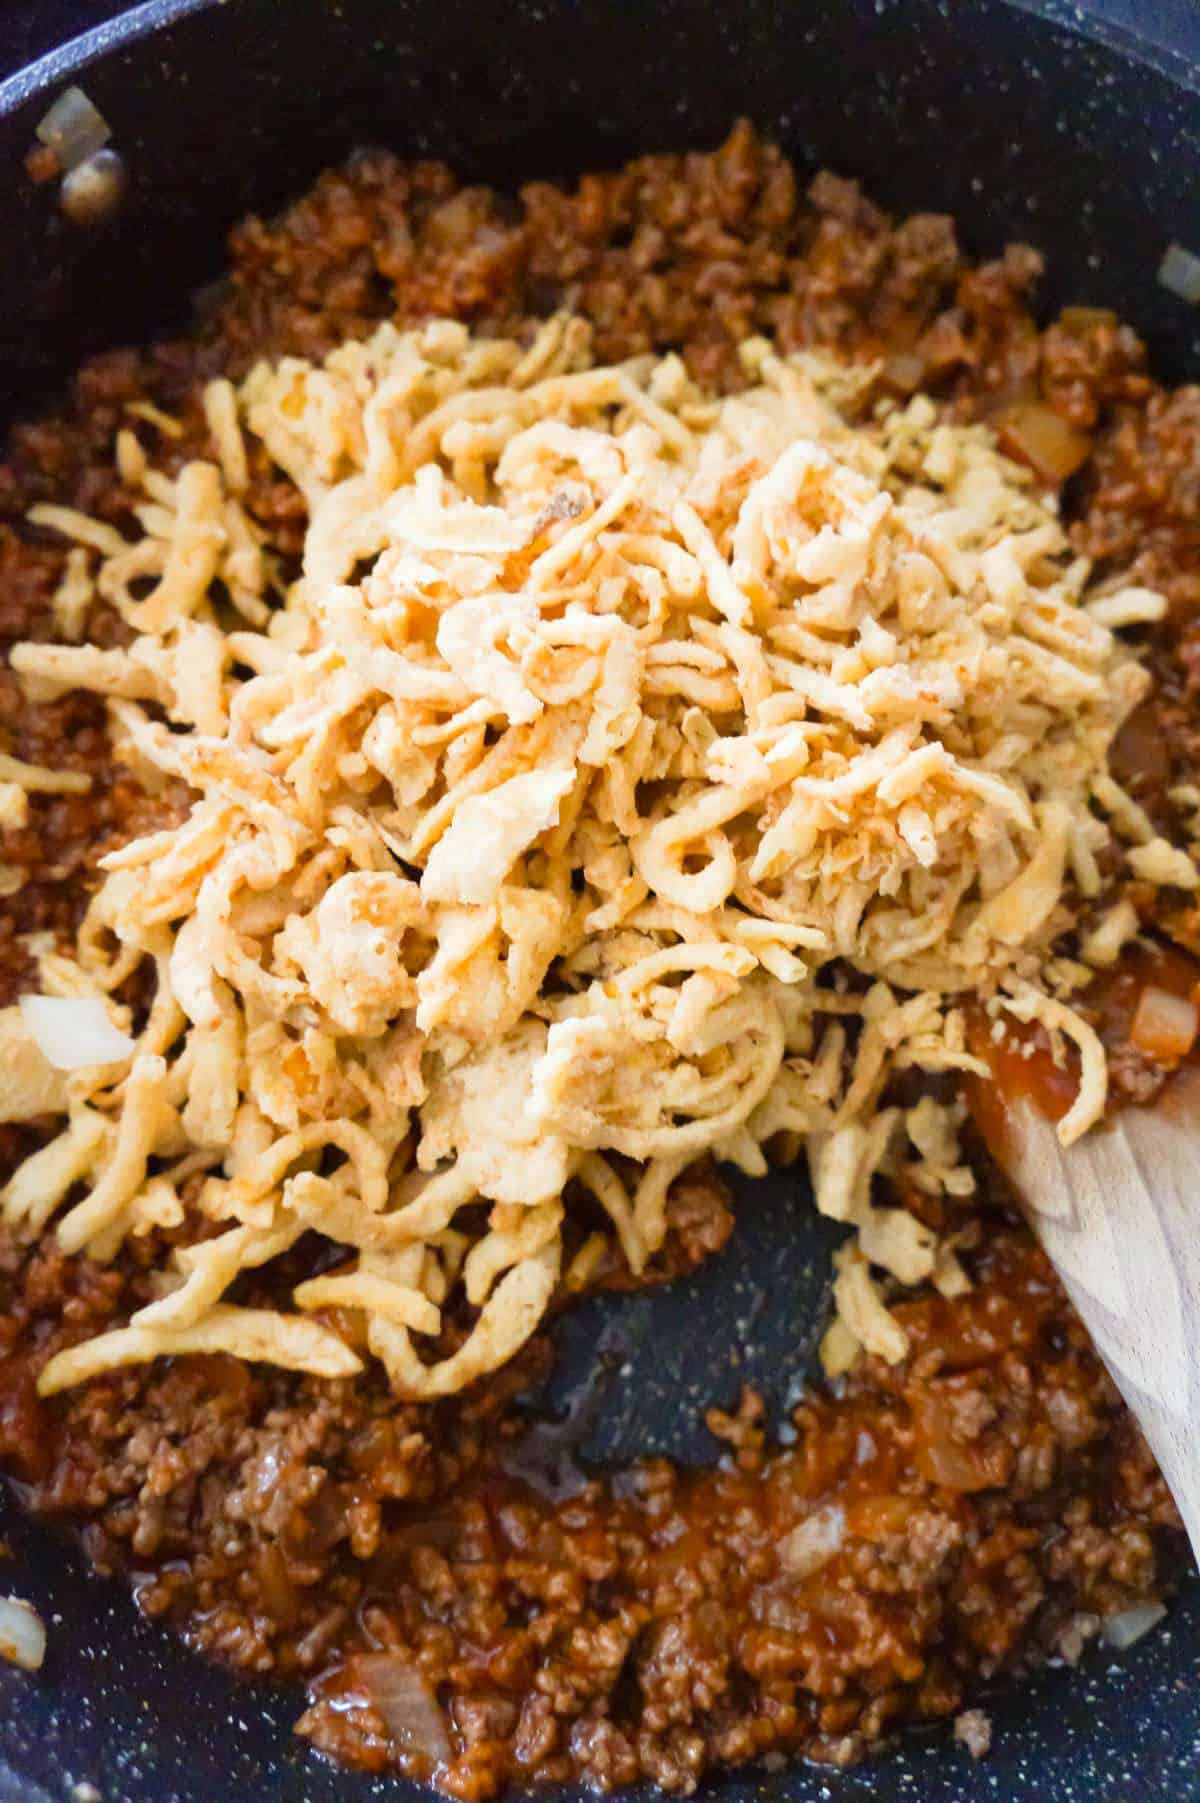 French's fried onions on top of sloppy joe mixture in a saute pan